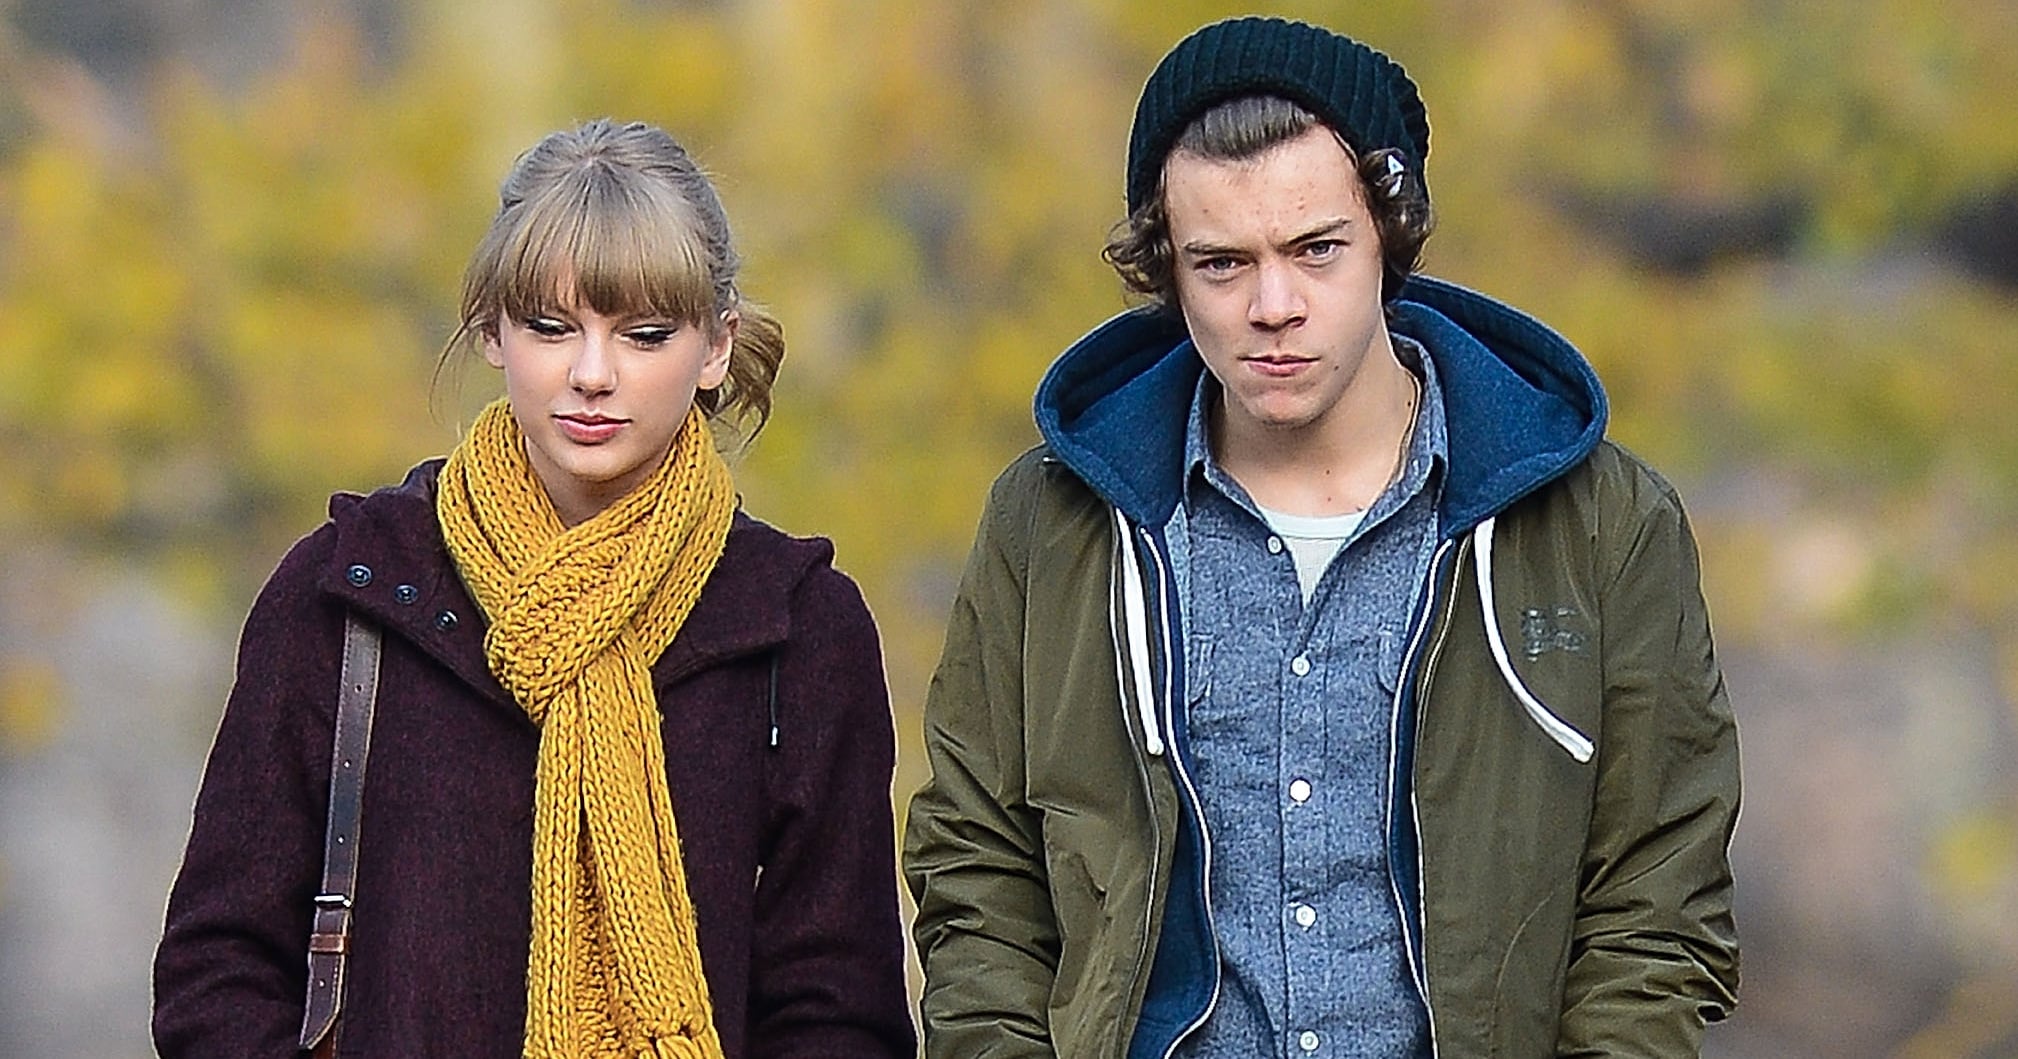 a-timeline-of-harry-styles-and-taylor-swift’s-relationship